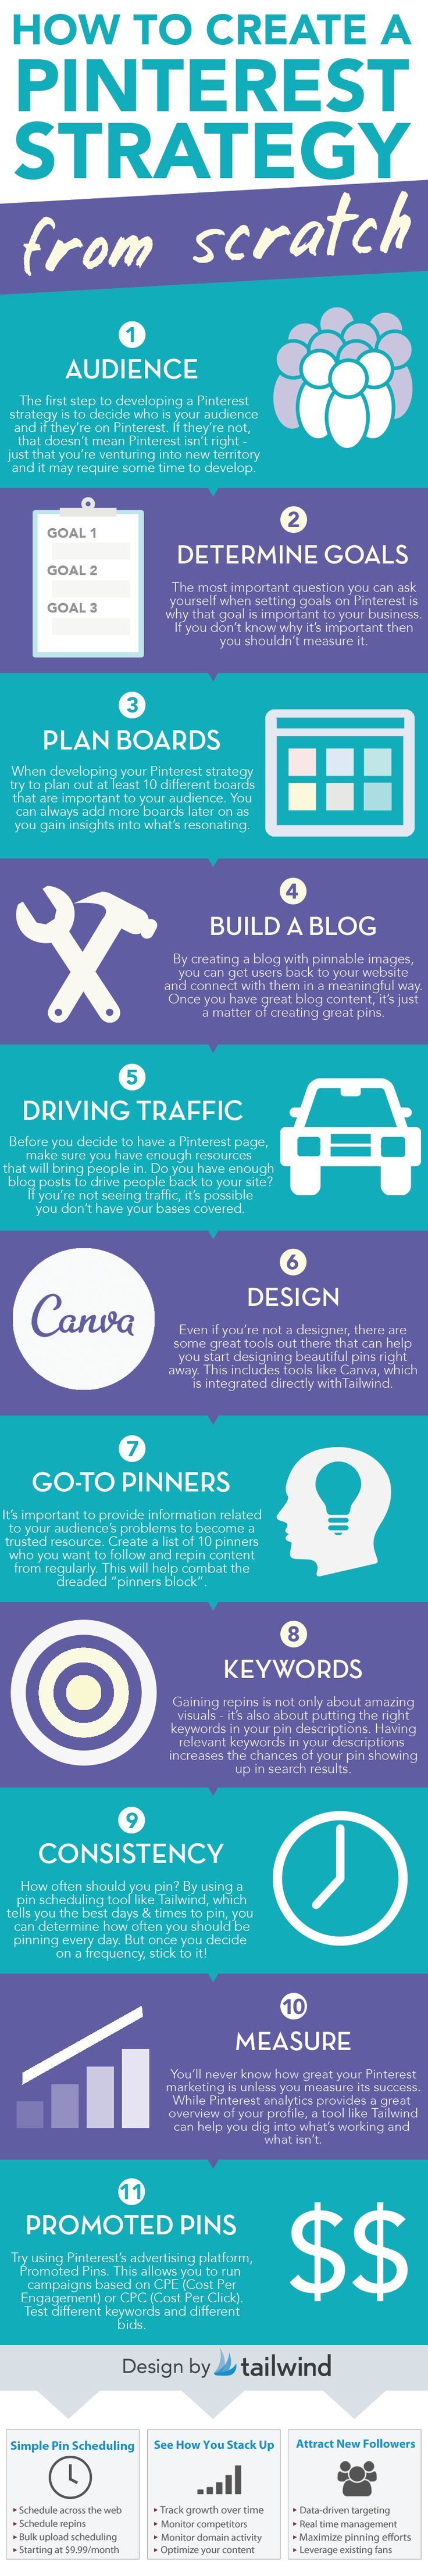 Thank you Tailwind App for mentioning Canva! Some great tips on How To Develop a Pinterest Strategy from S